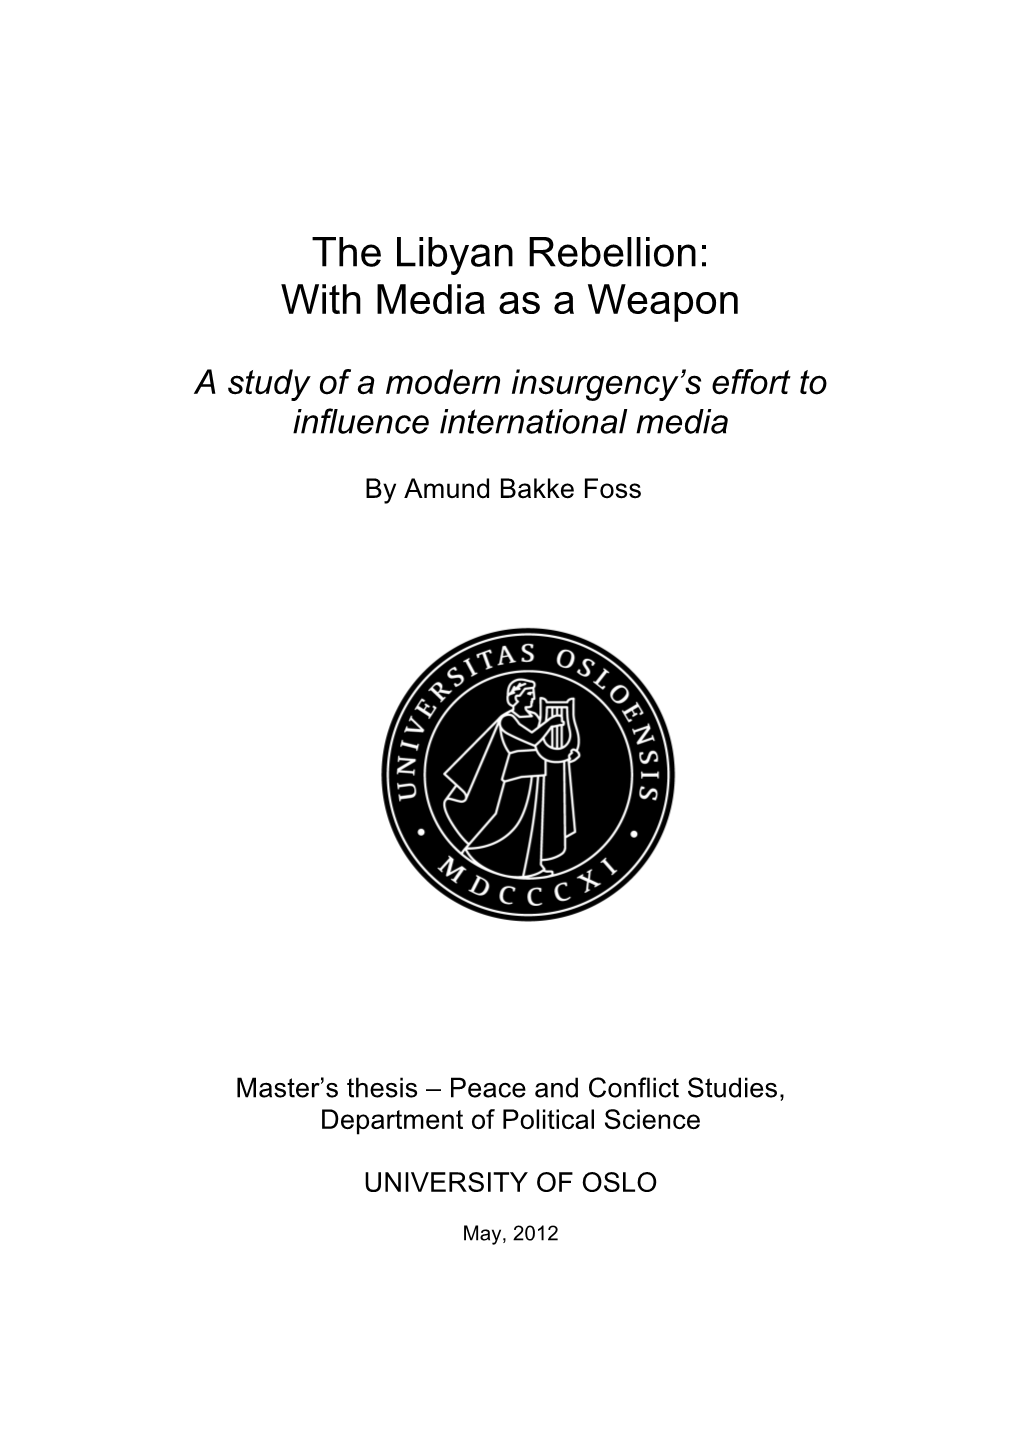 The Libyan Rebellion: with Media As a Weapon